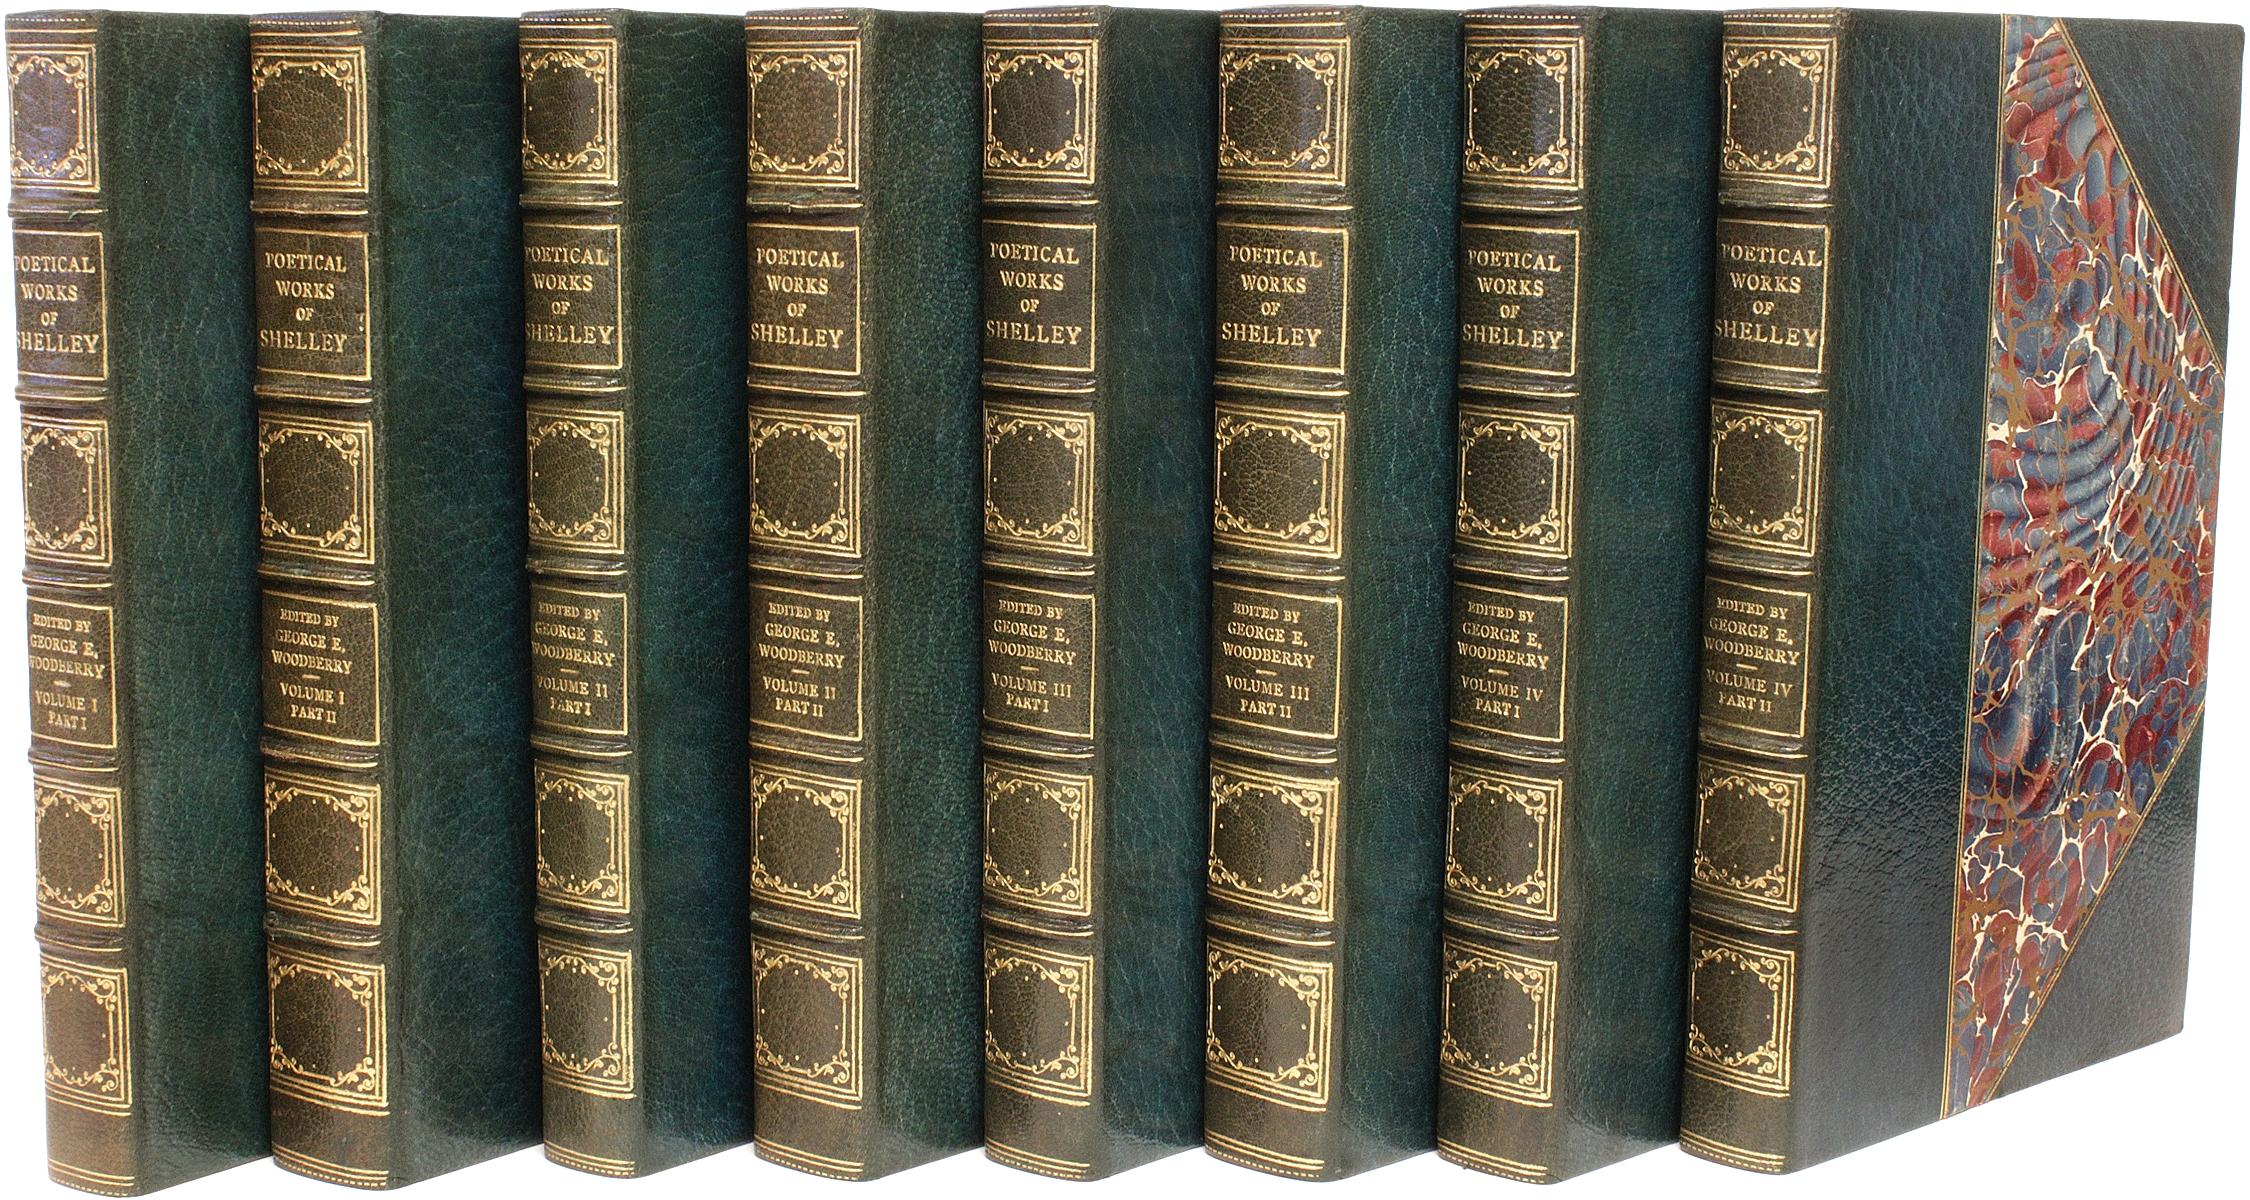 Late 19th Century Complete Poetical Works of Percy Bysshe Shelley, 8 Vols, 1892, Leather Bound